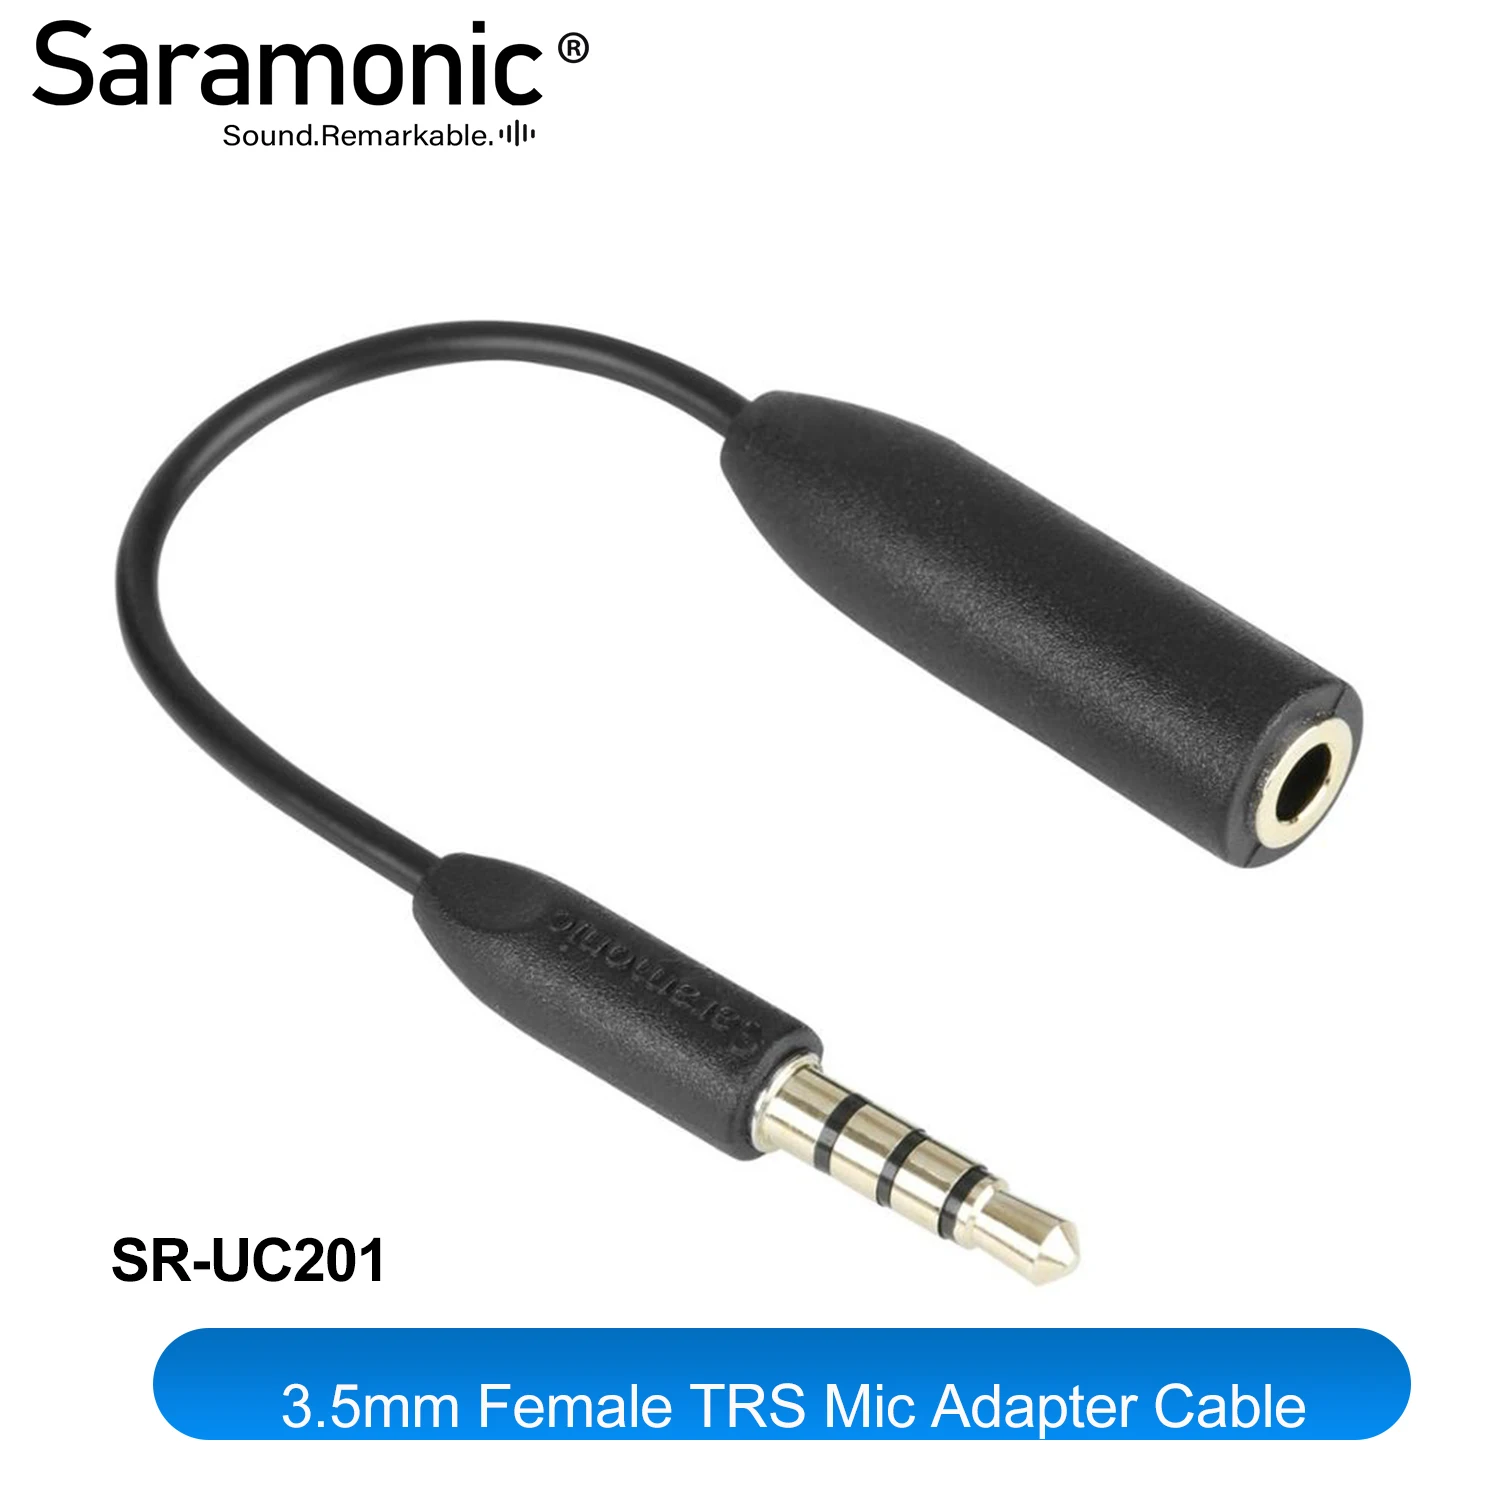 

Saramonic SR-UC201 3.5mm TRS (Female) Microphone Adapter Converter Cable to TRRS (Male) for iPhone & Android Smartphones